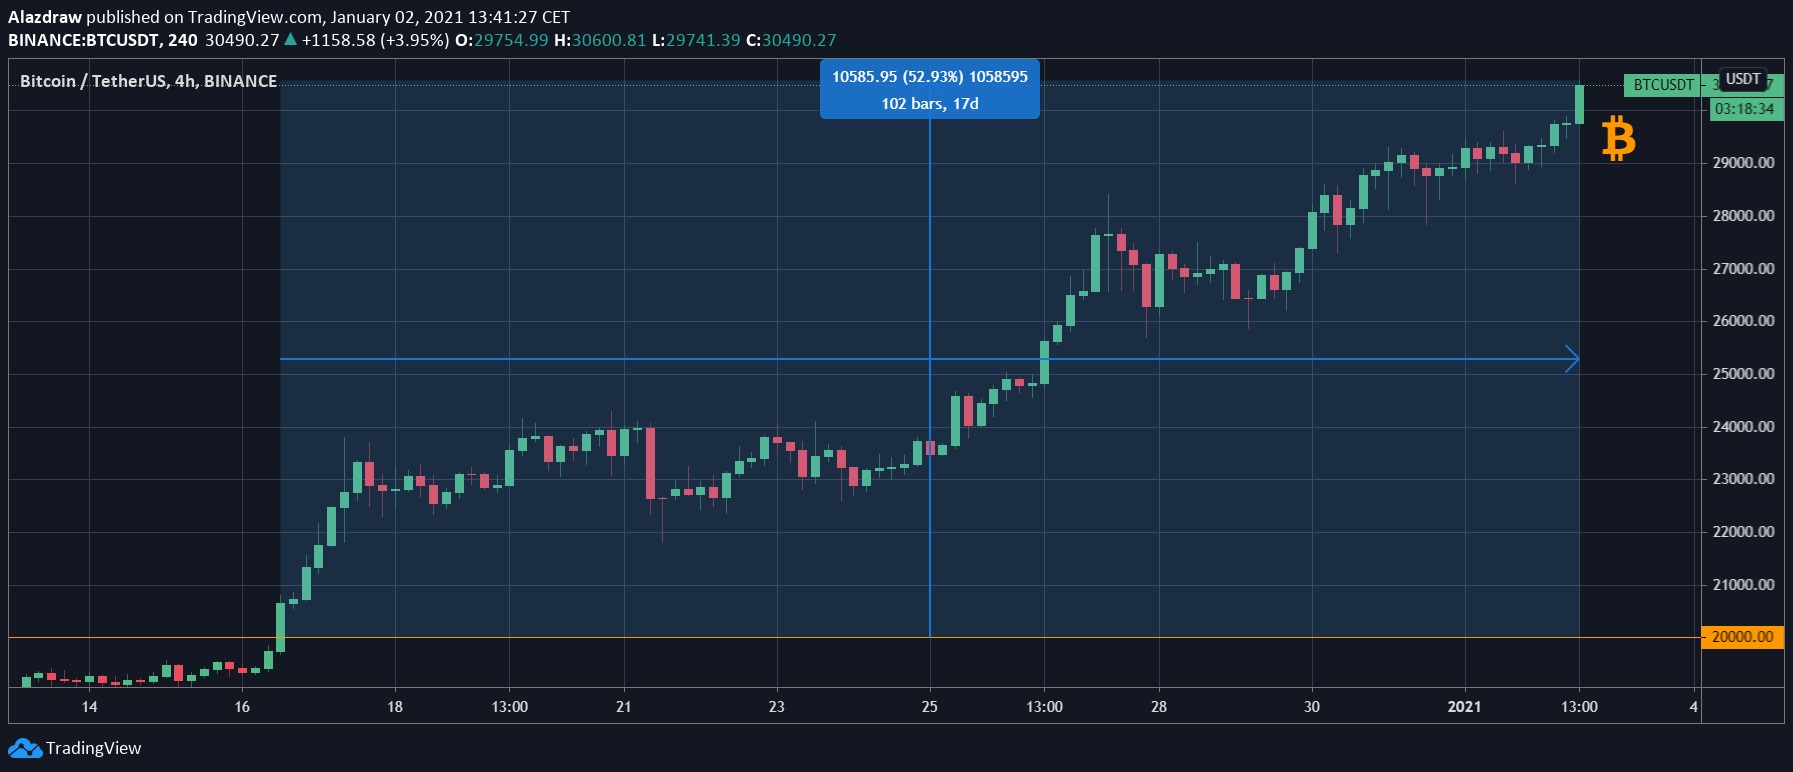 Bitcoin (BTC) price since its previous all time high on December 16, 2020